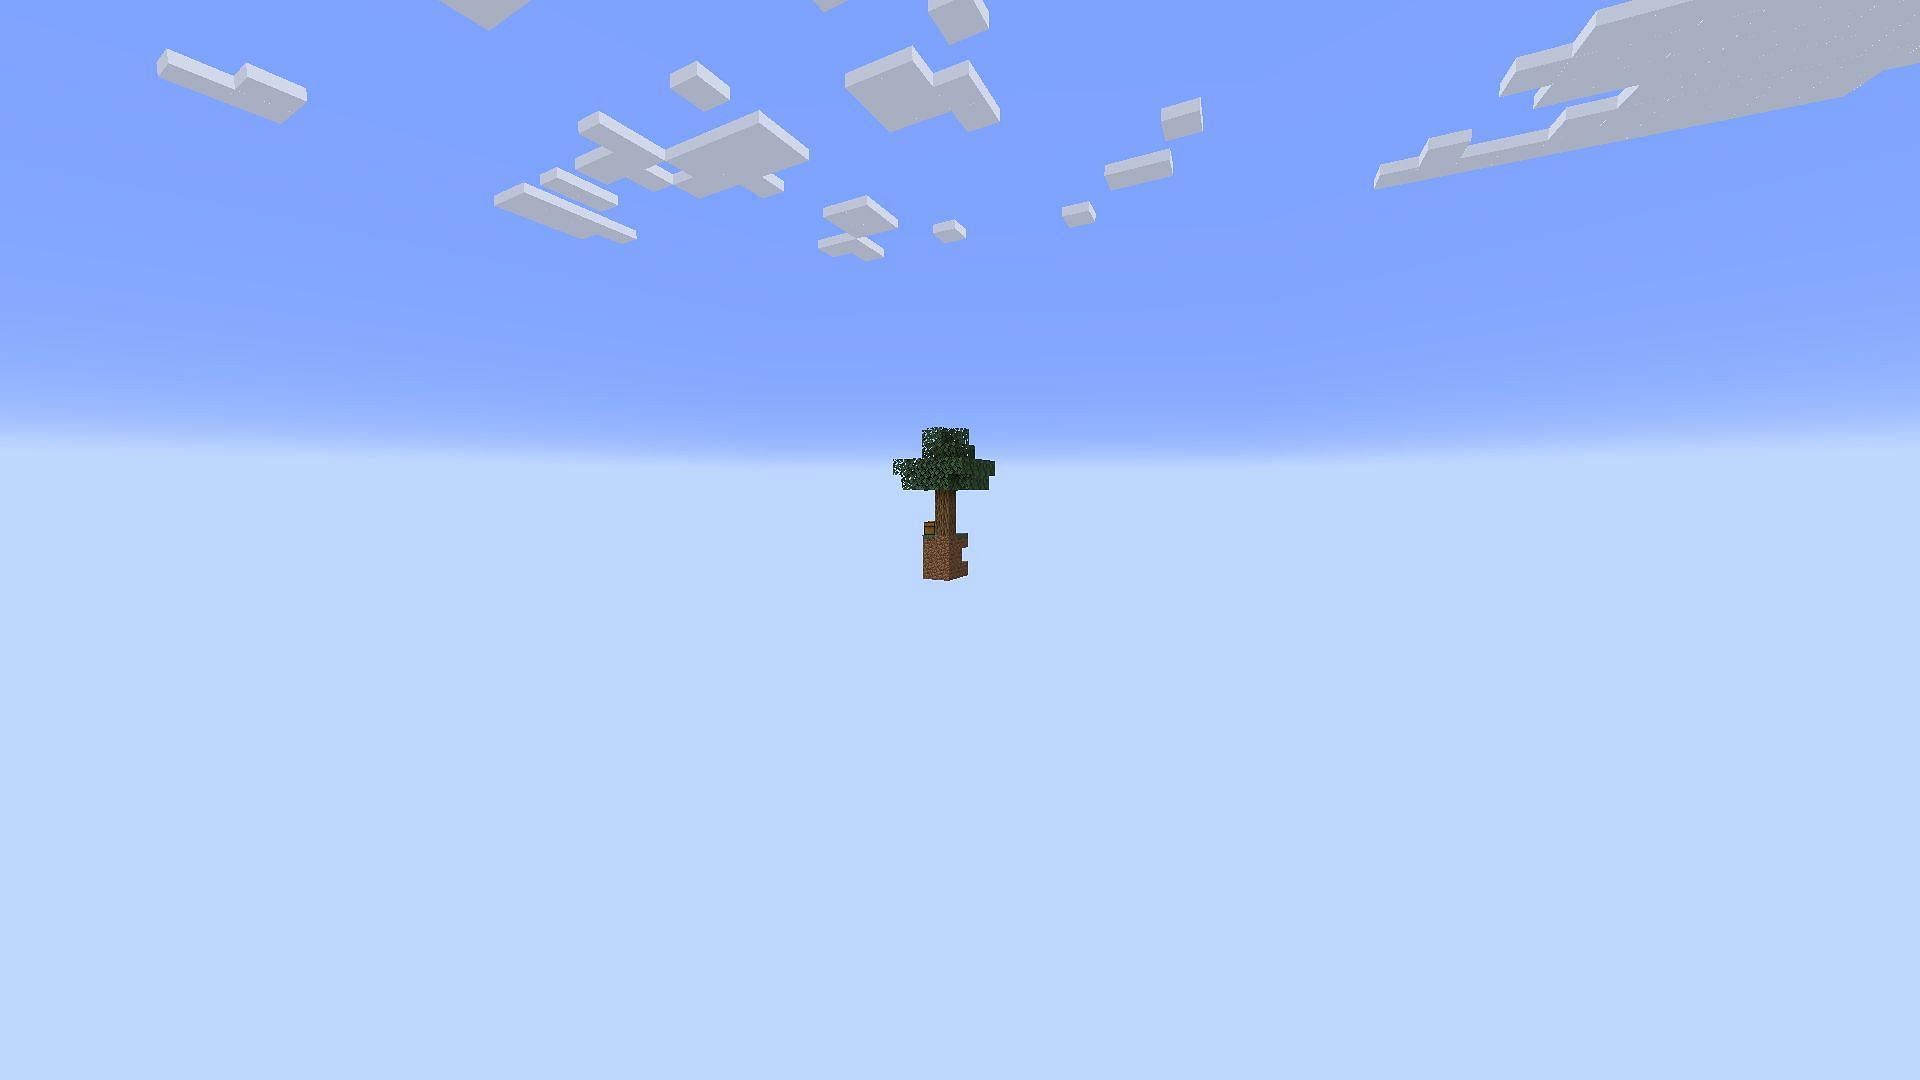 Players will find other islands with more resources to progress in Minecraft Skyblock (Image via Mojang)